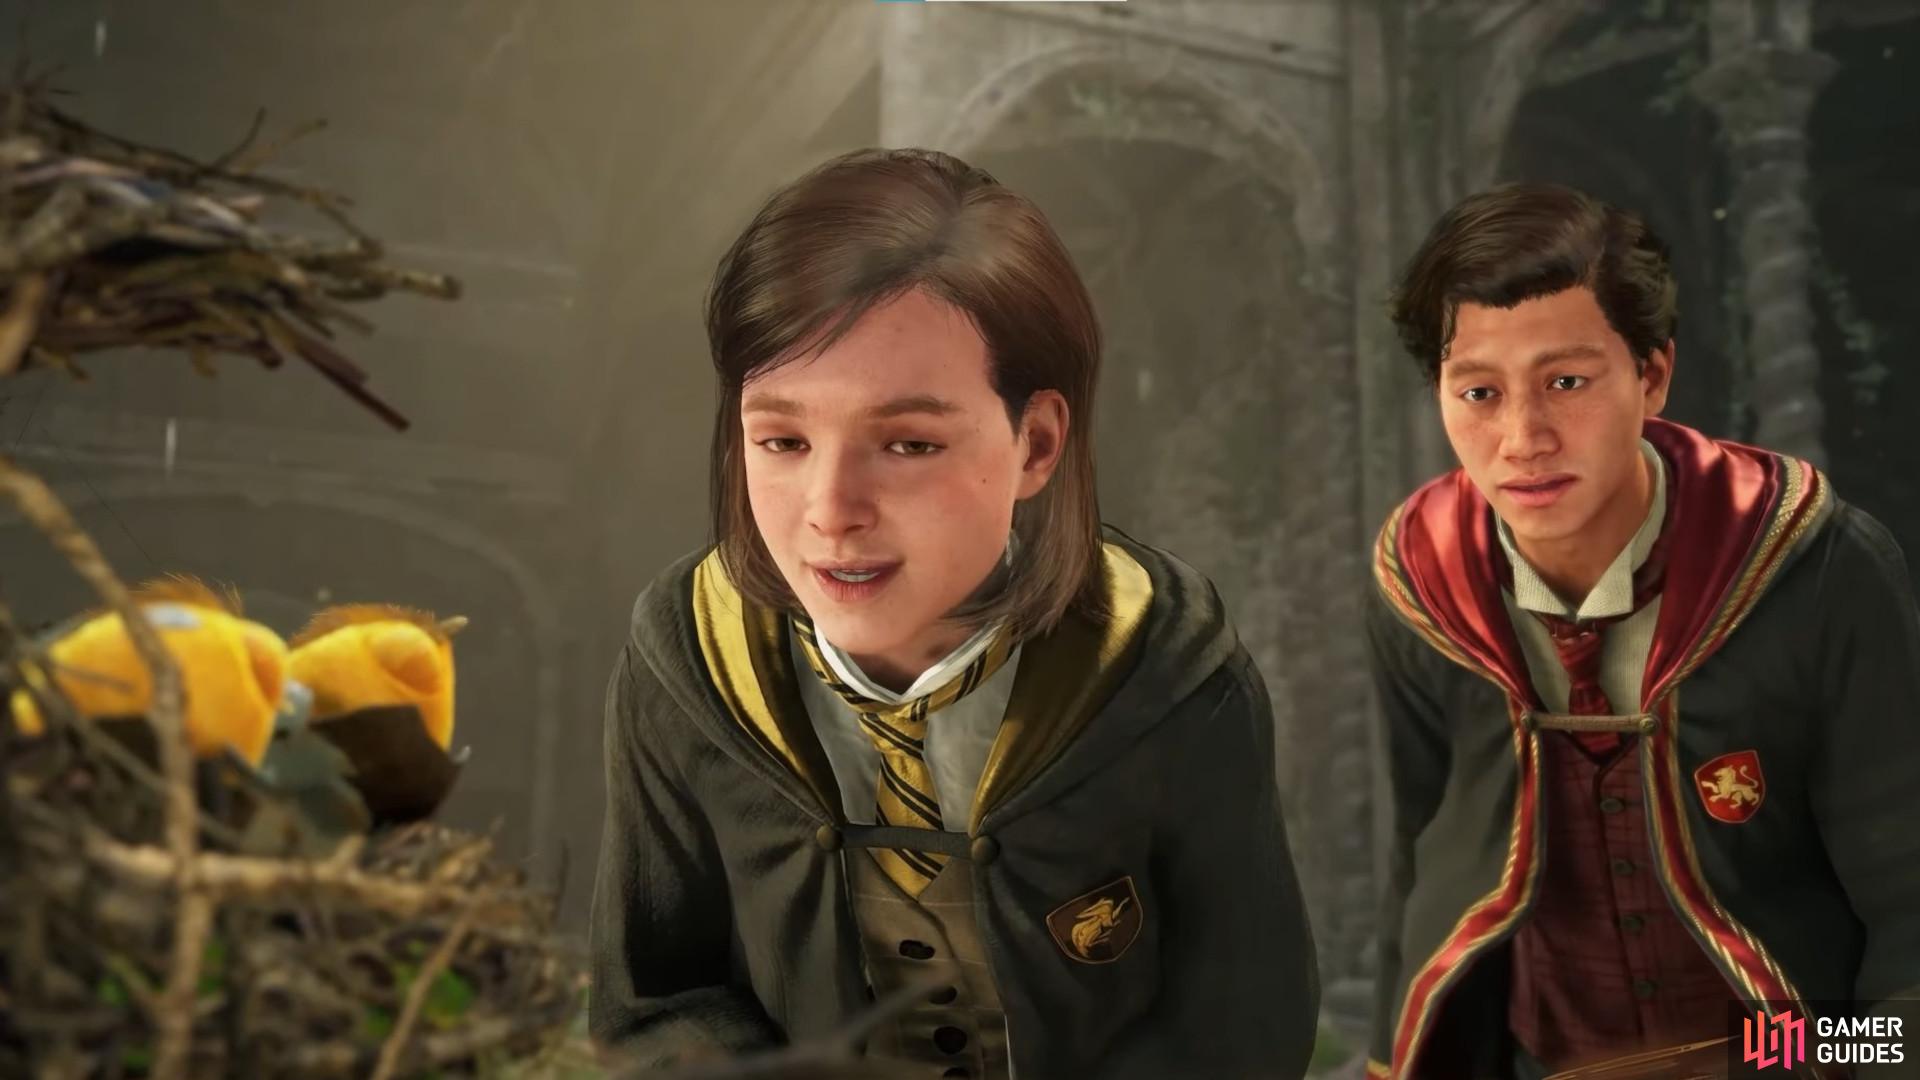 Here’s a closer look at the Hogwarts Legacy Companions and how the feature works. Image via Warner Brothers.